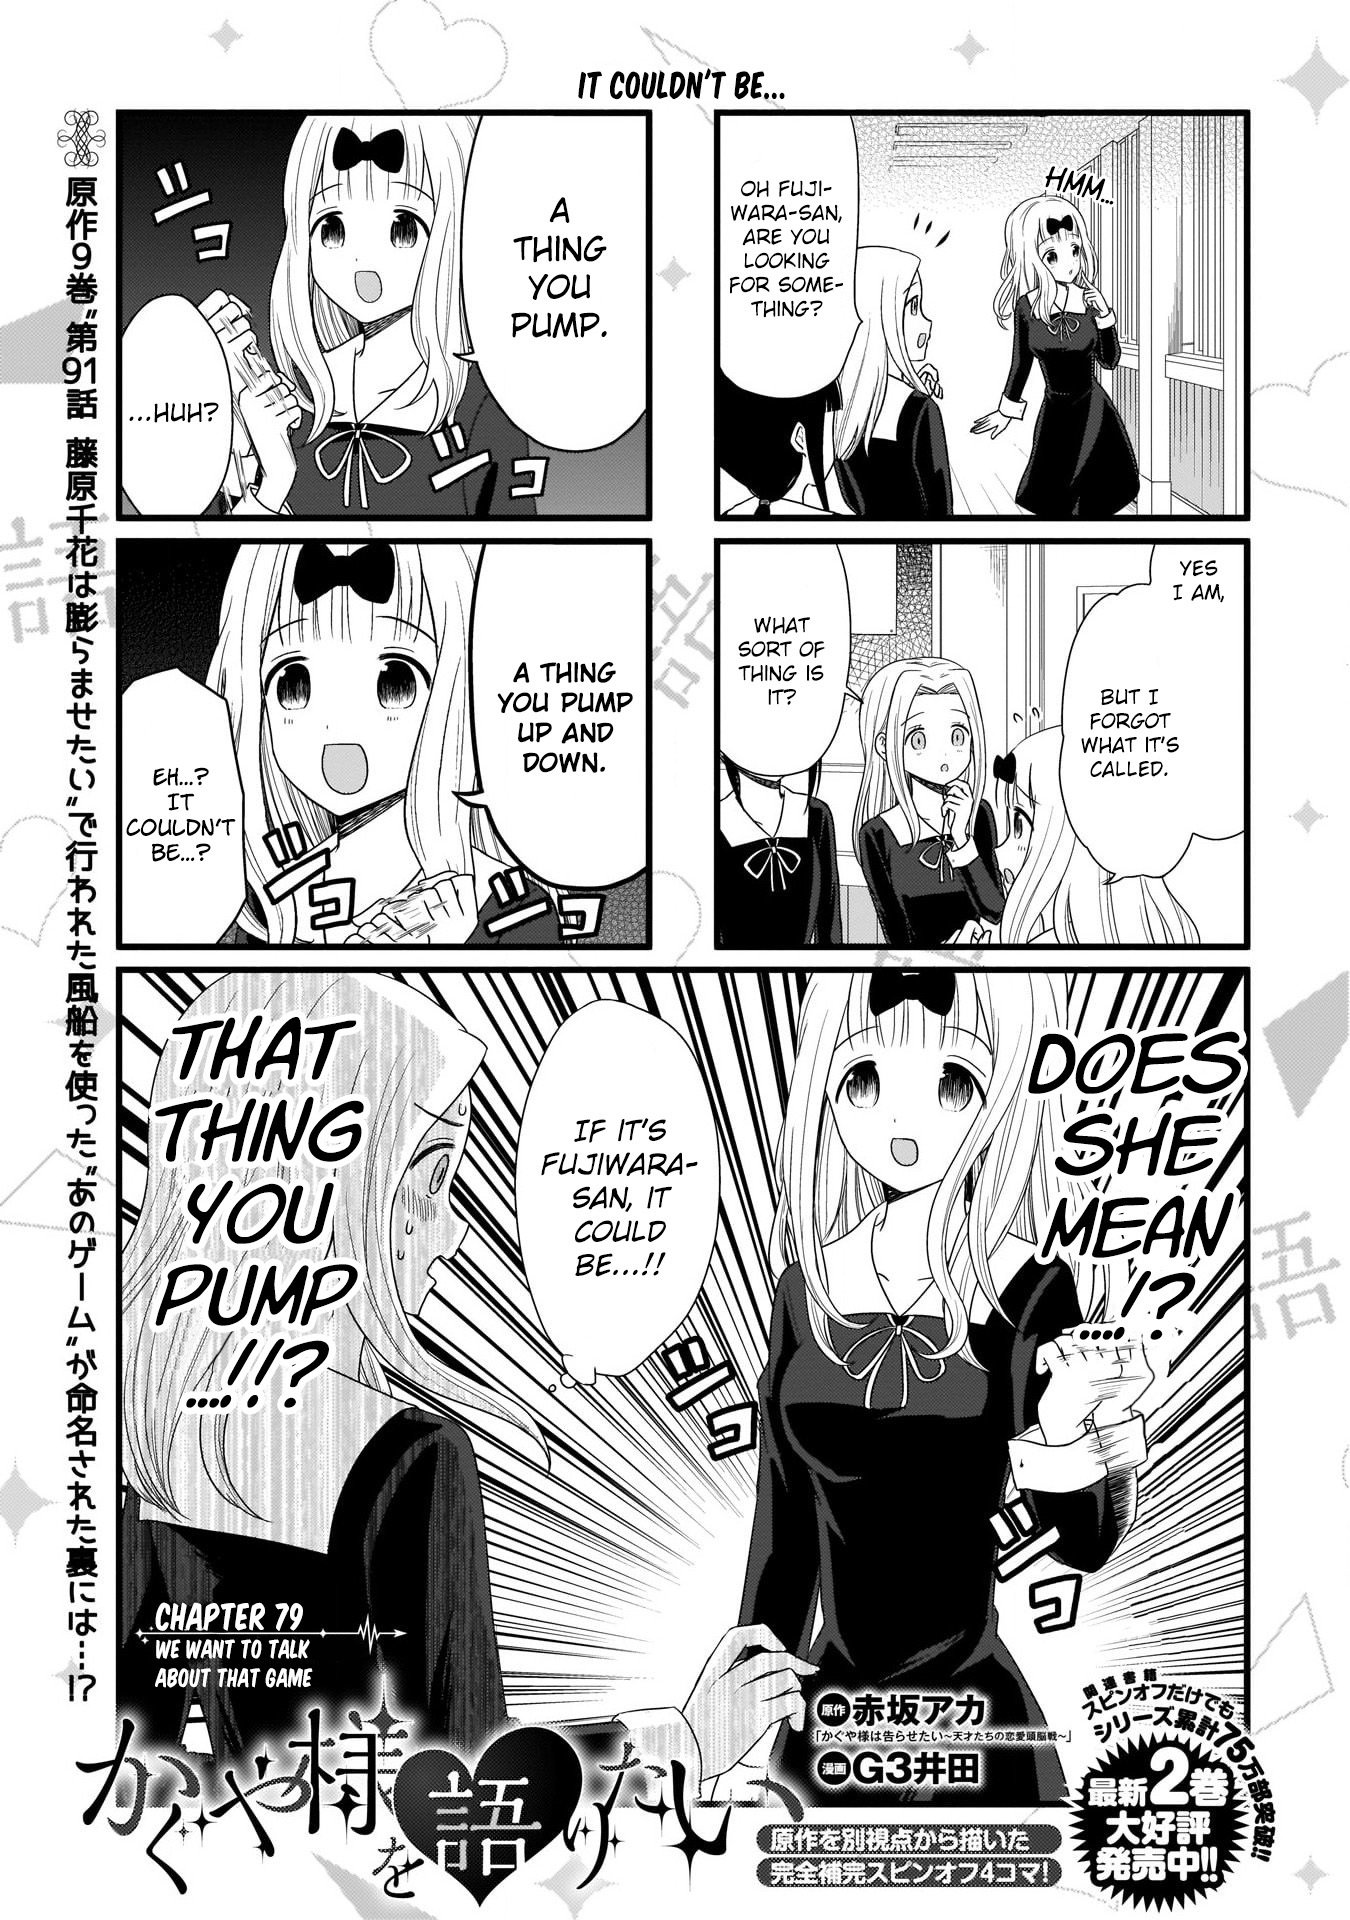 We Want to Talk About Kaguya ch.79